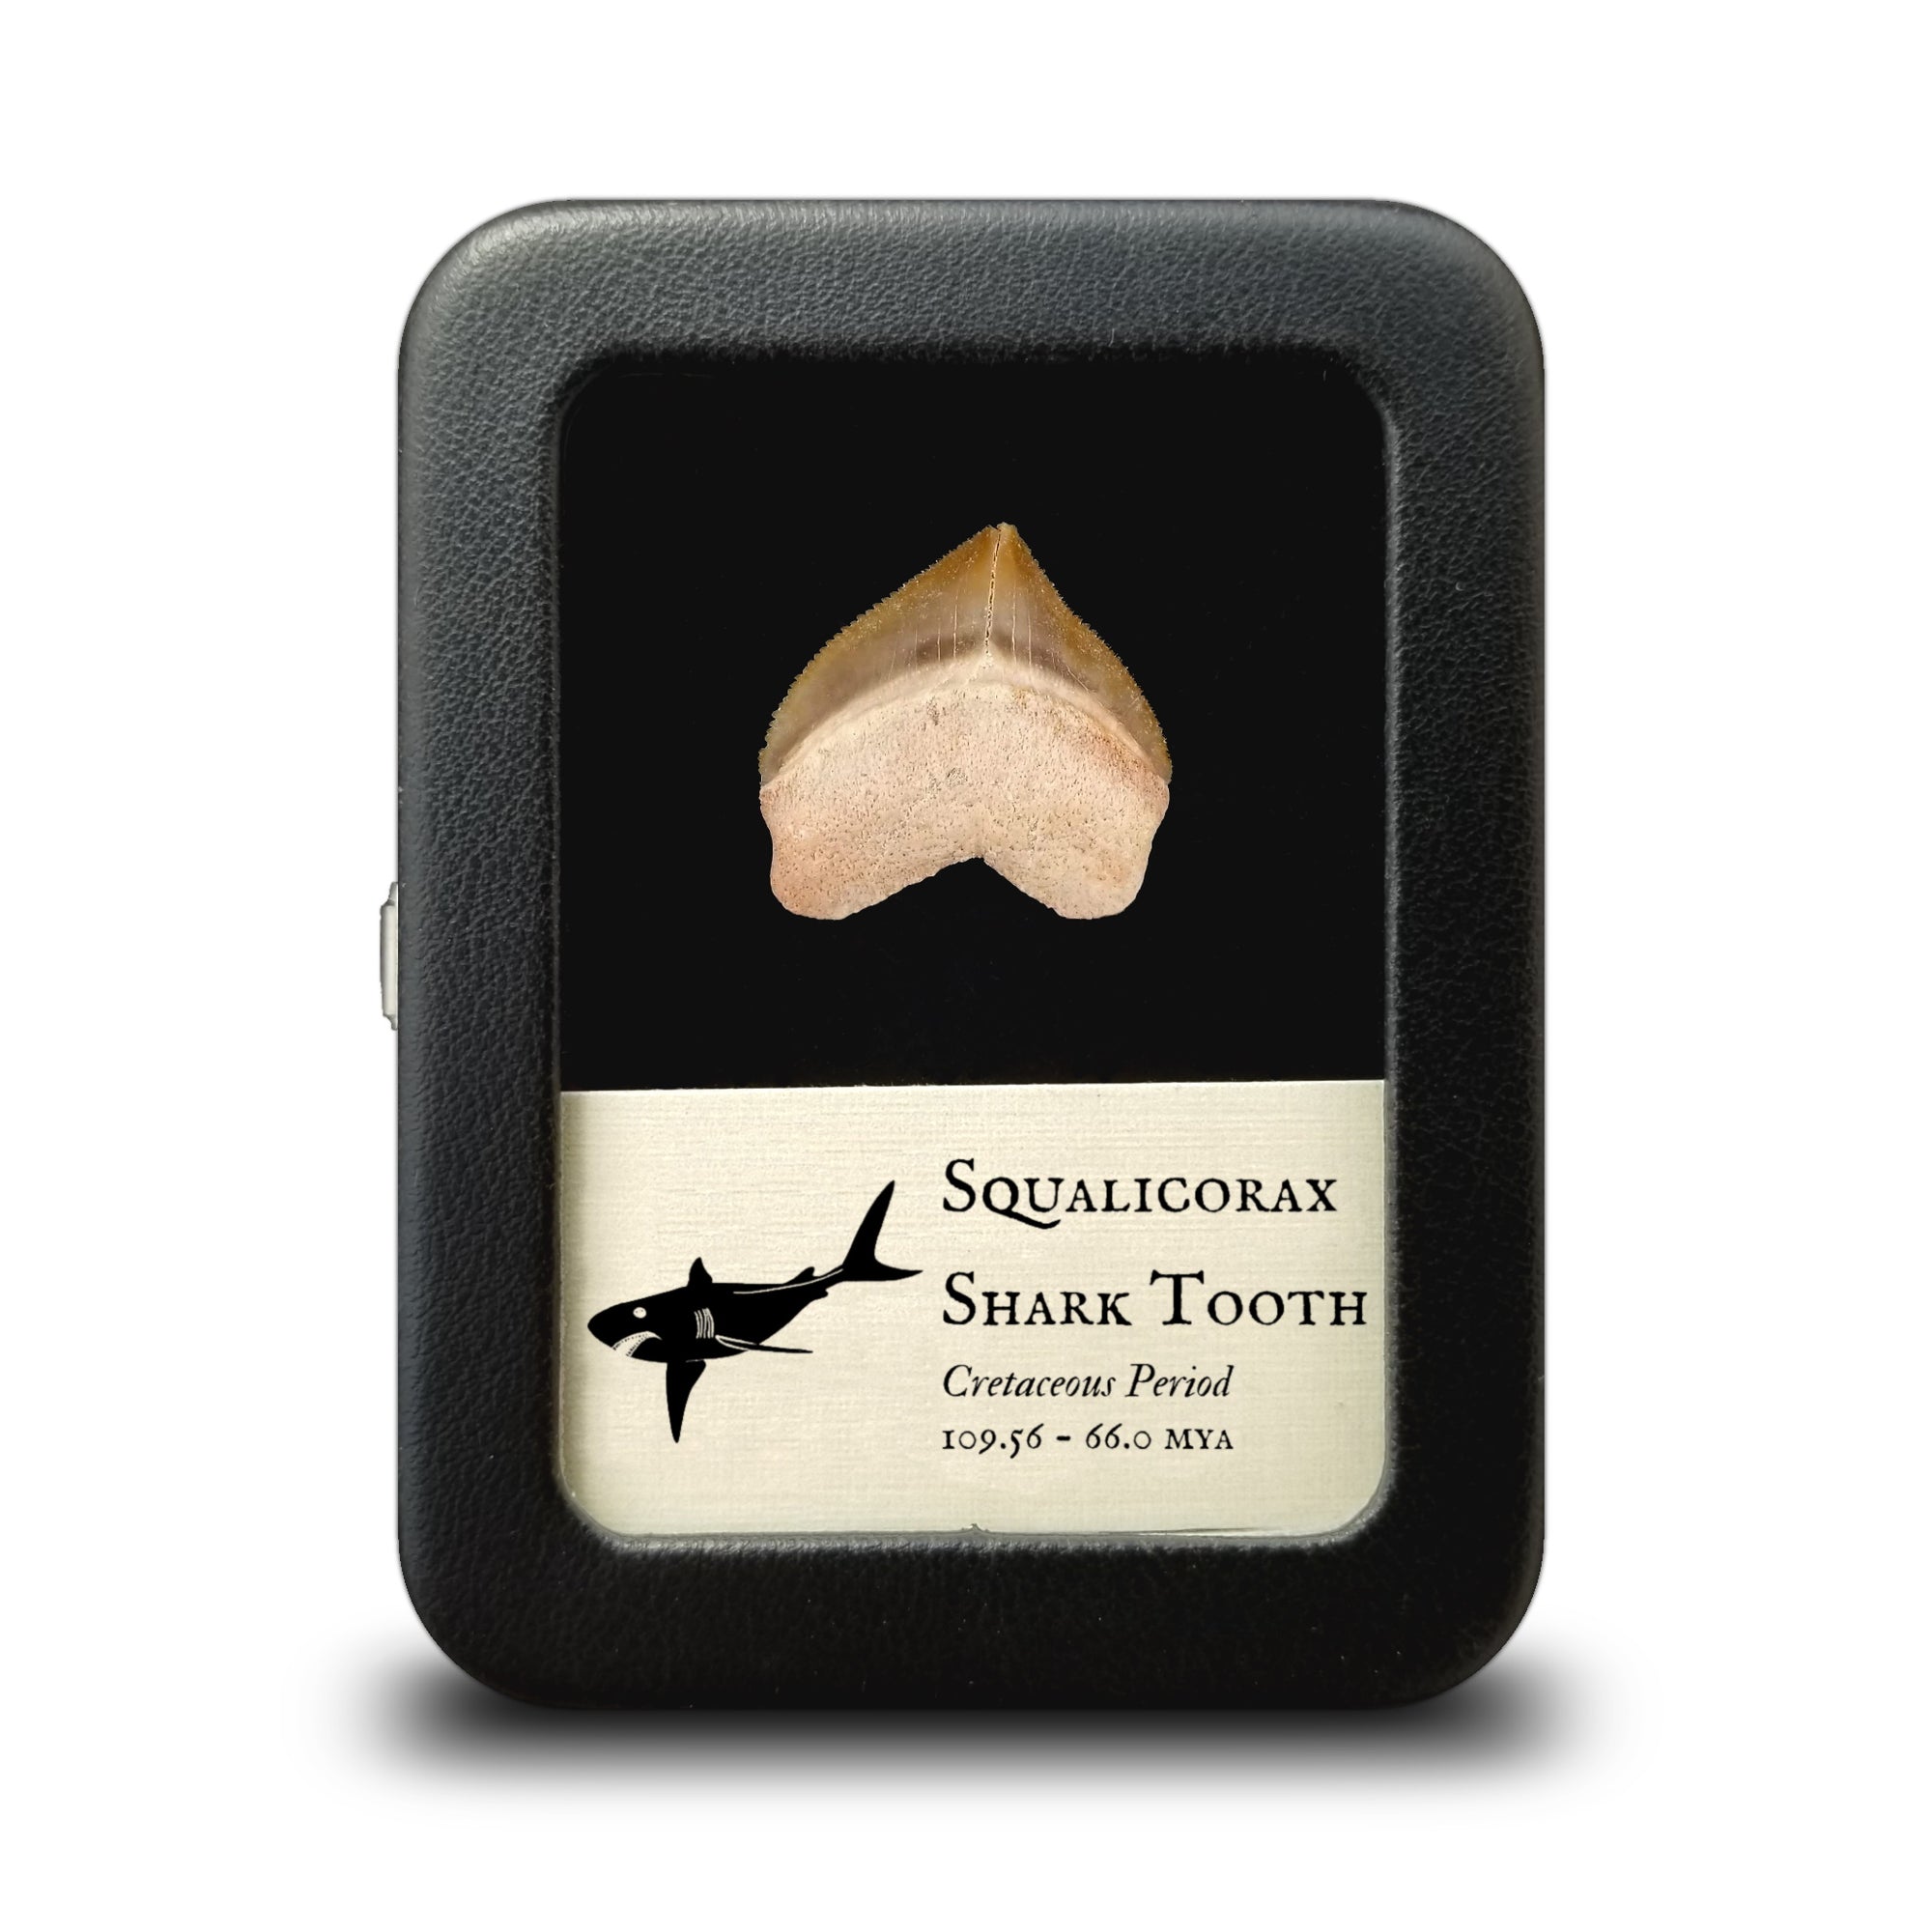 Squalicorax Shark Tooth - Cretaceous Period - 109.56 to 66.0 MYA - Morocco